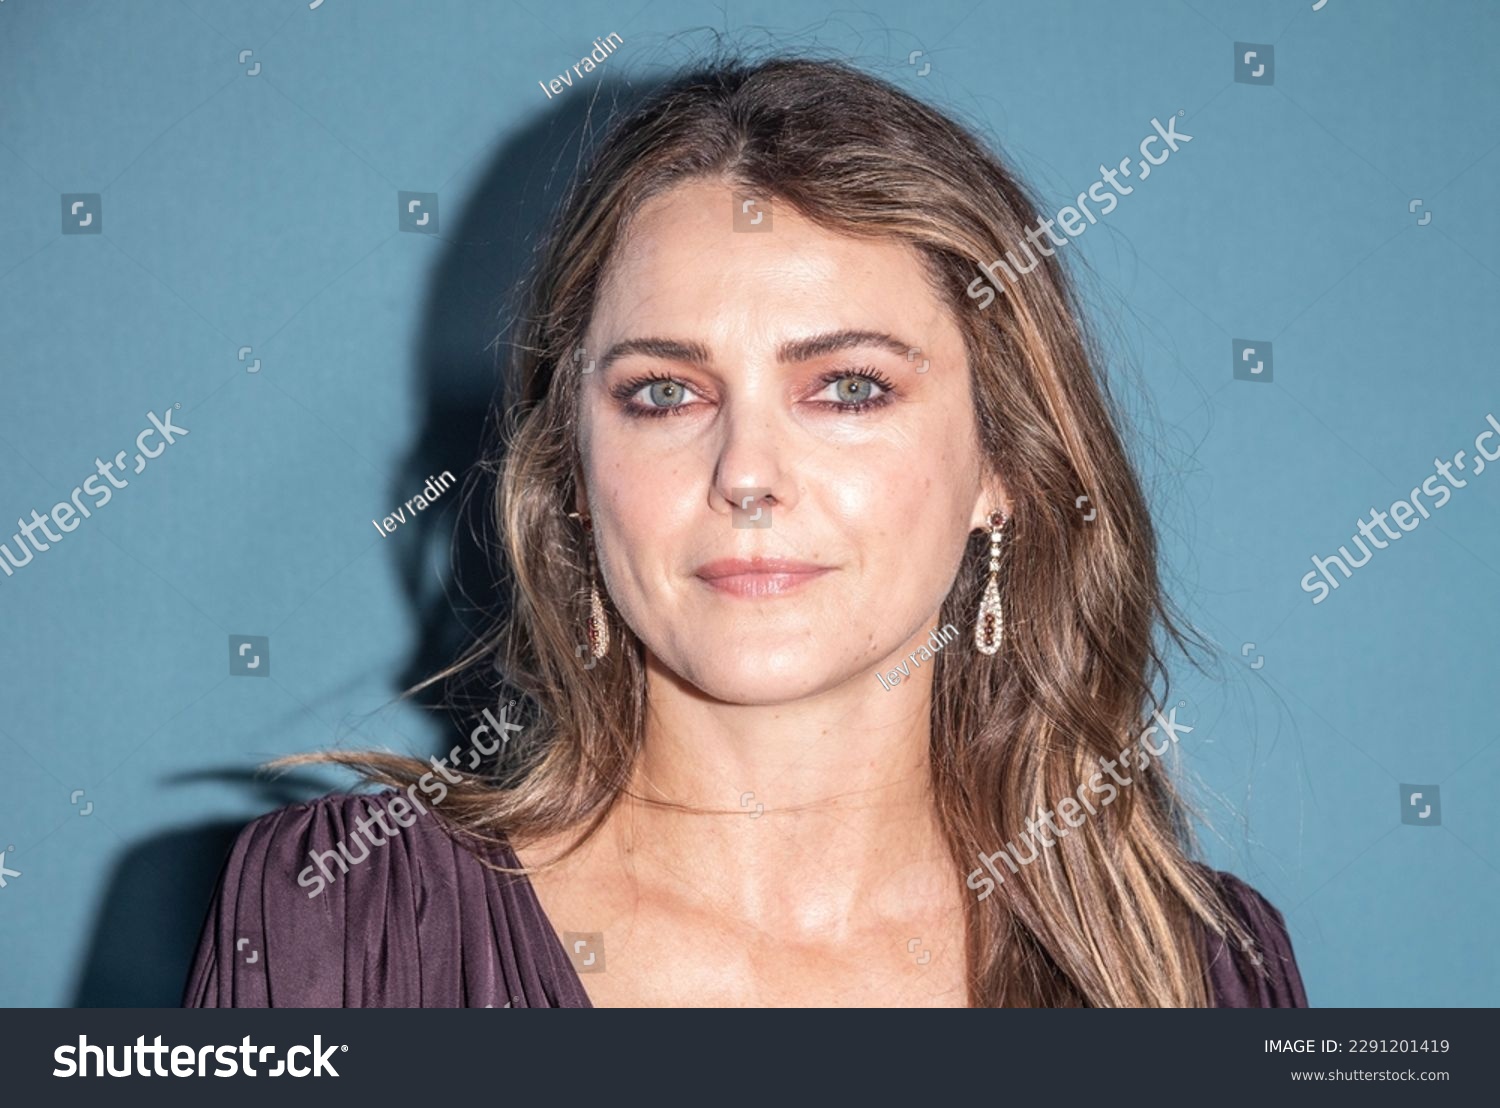 Keri Russell Gallery giving blowjobs